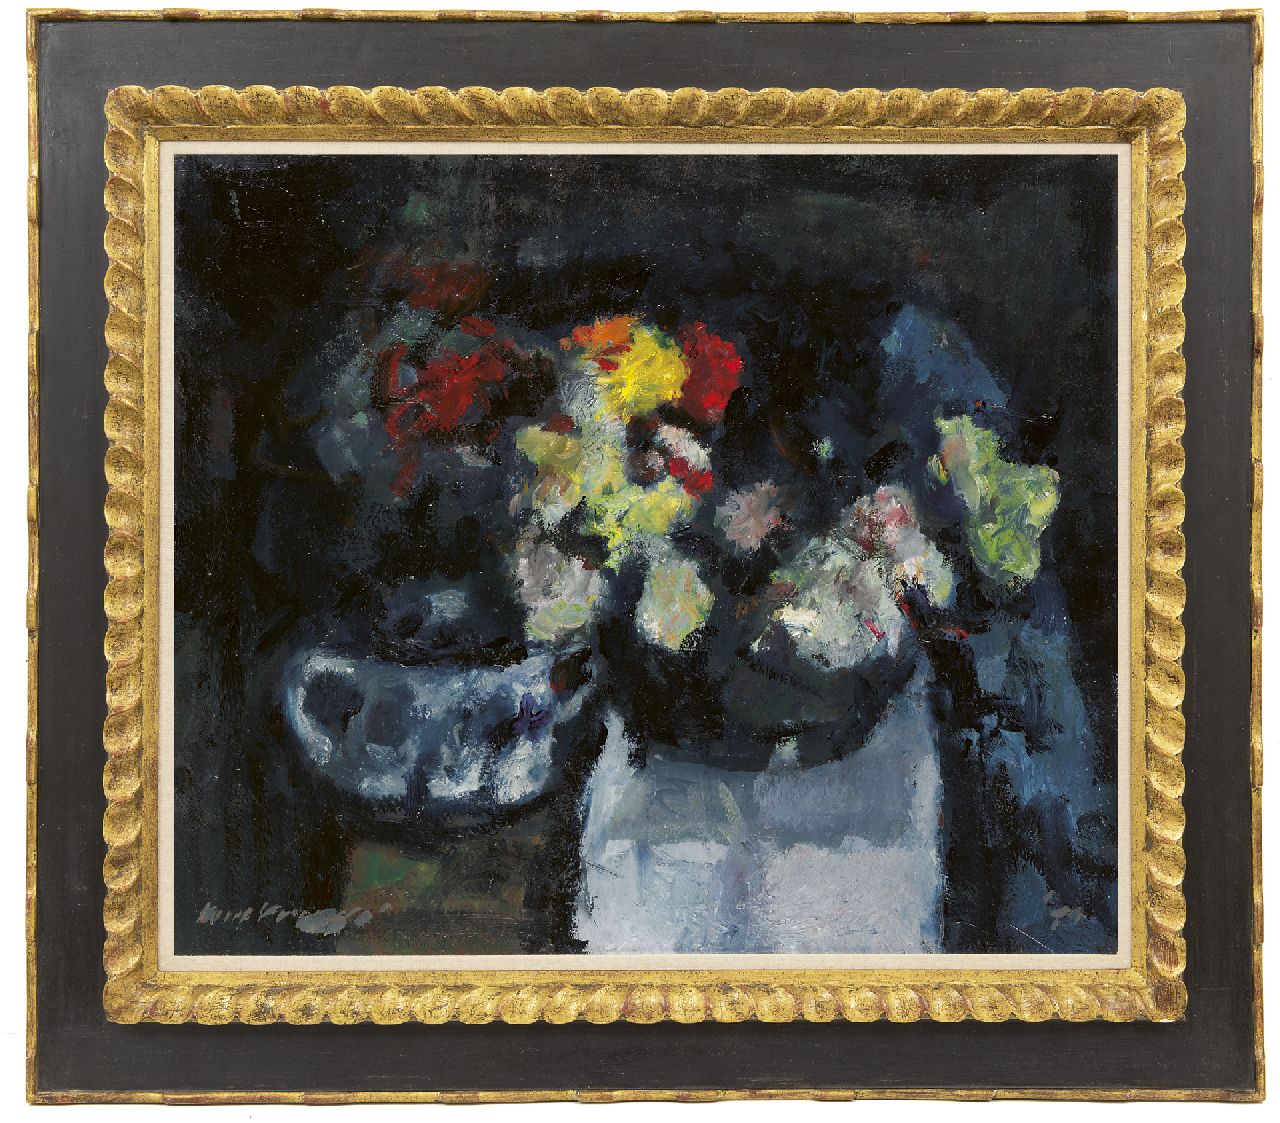 Verwey K.  | Kees Verwey | Paintings offered for sale | Flower still life, oil on canvas 60.2 x 70.5 cm, signed l.l